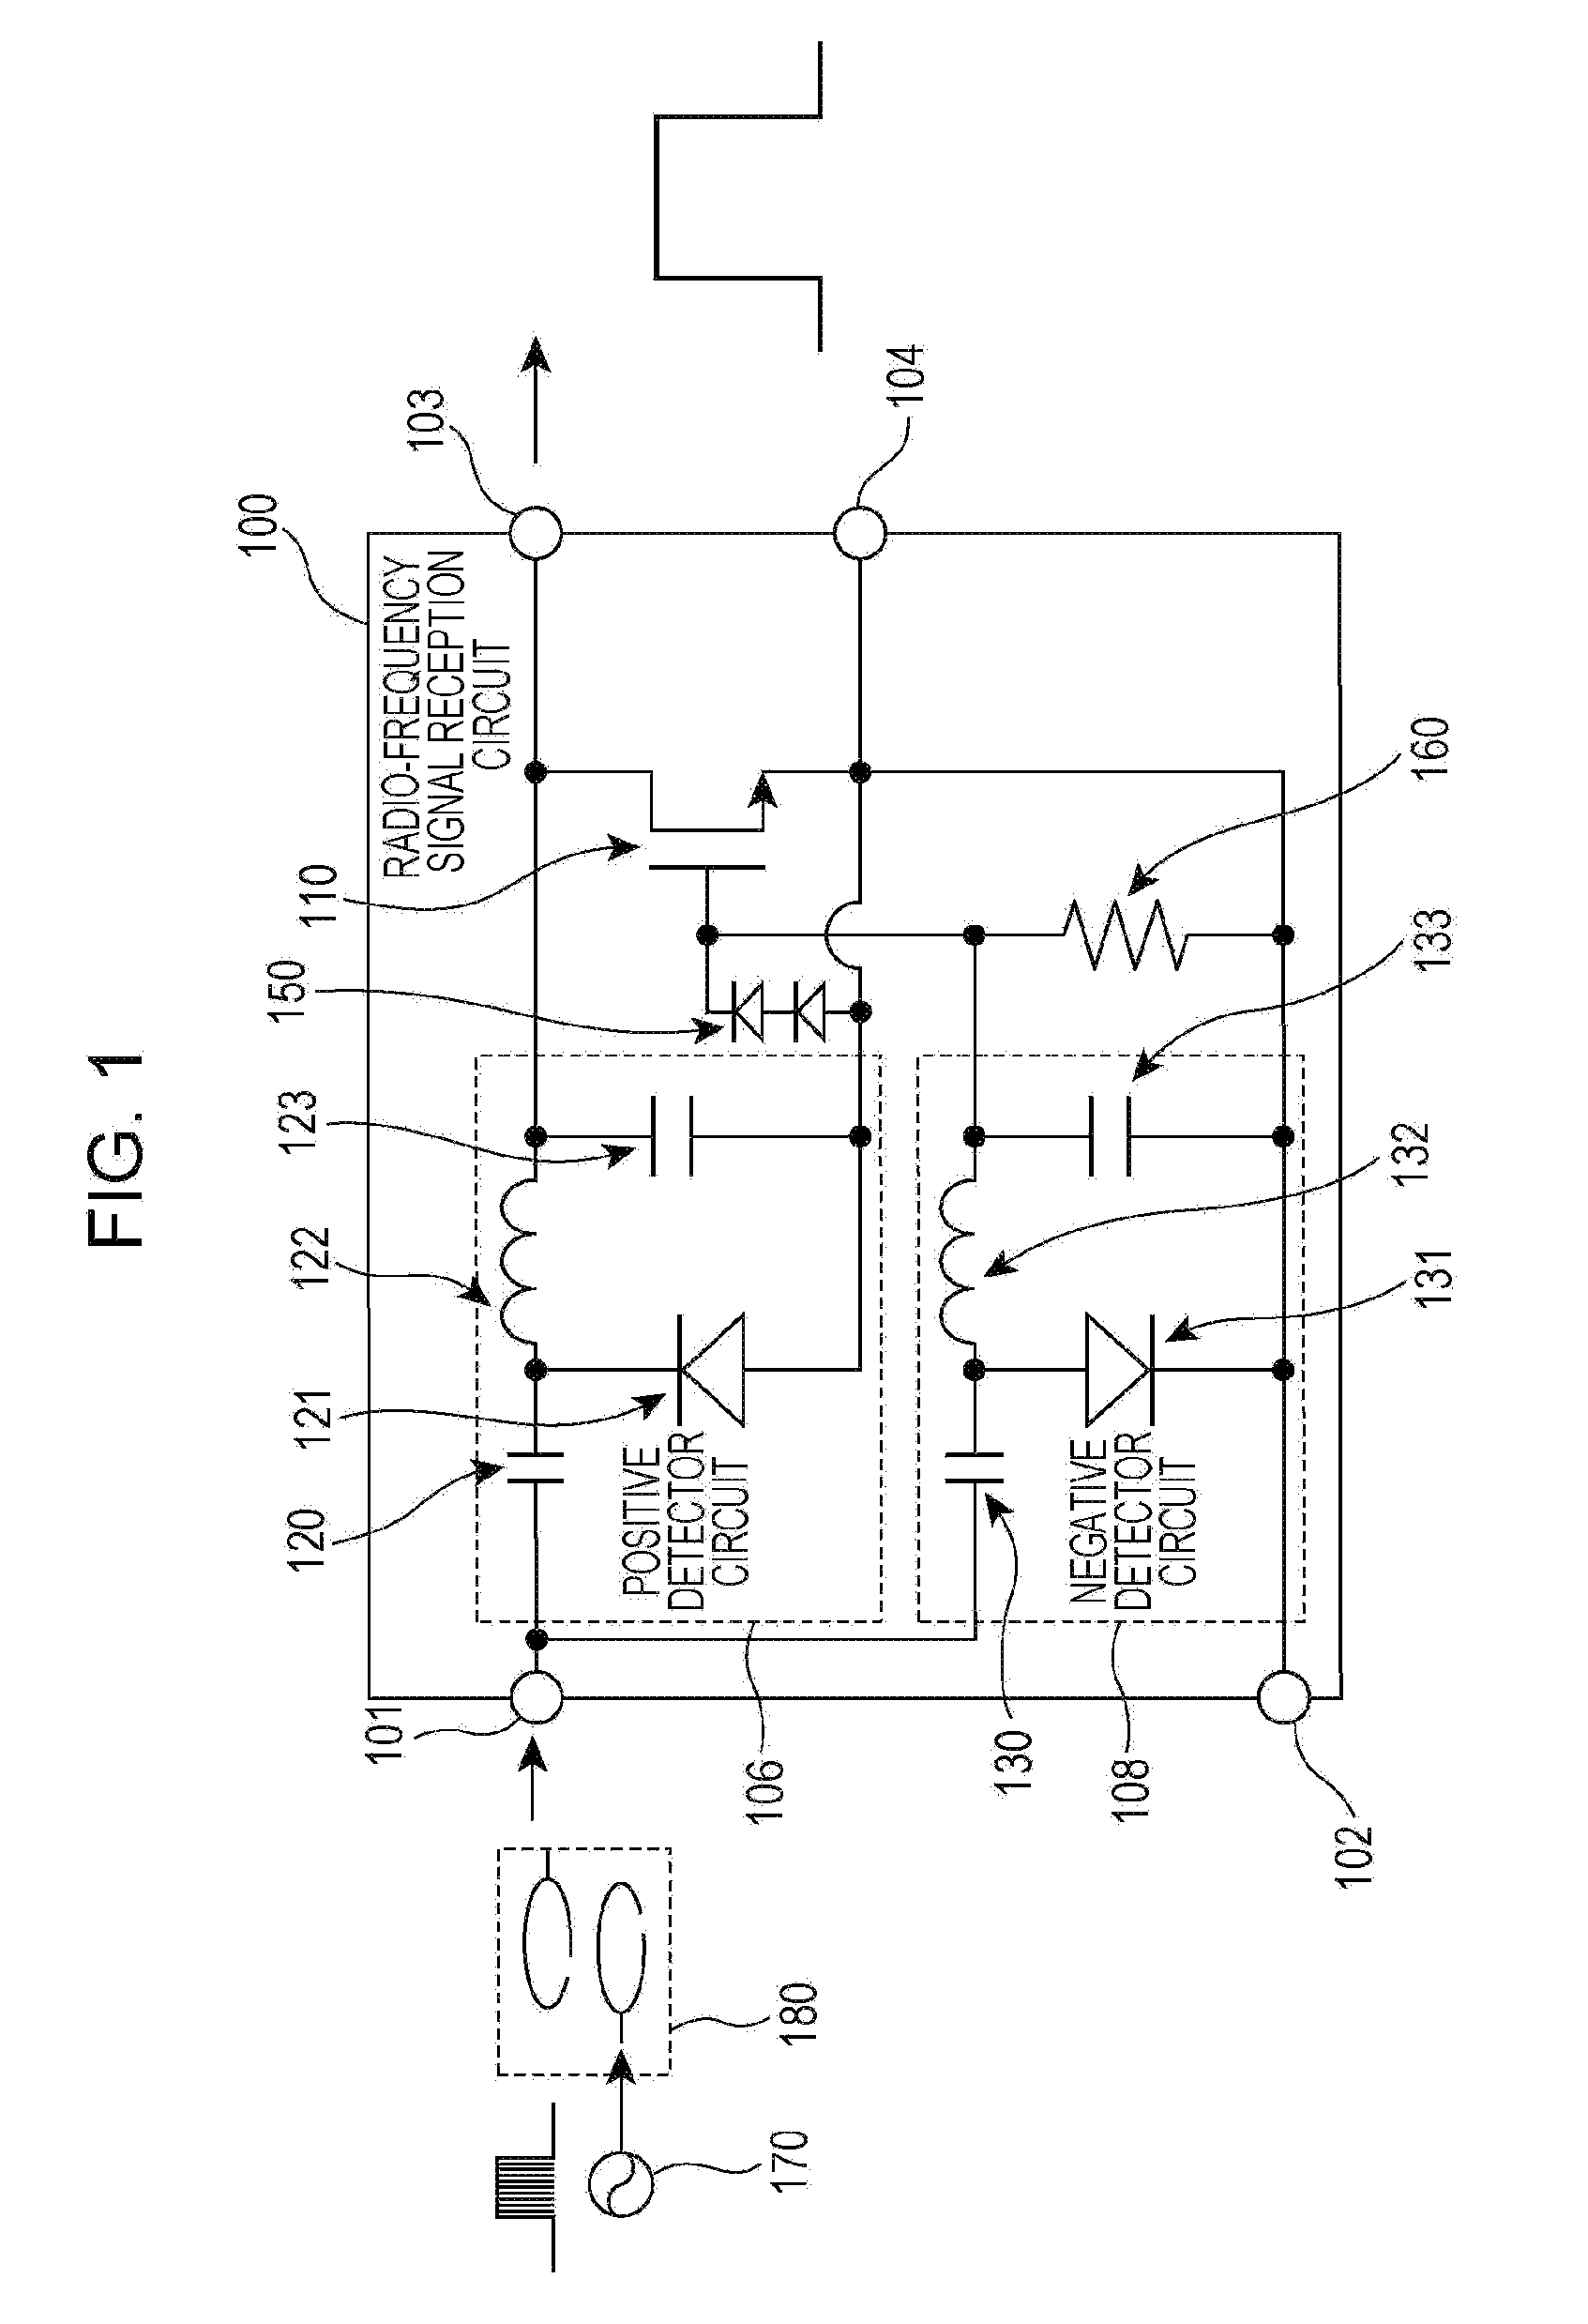 Signal reception circuit and isolated signal transmission device